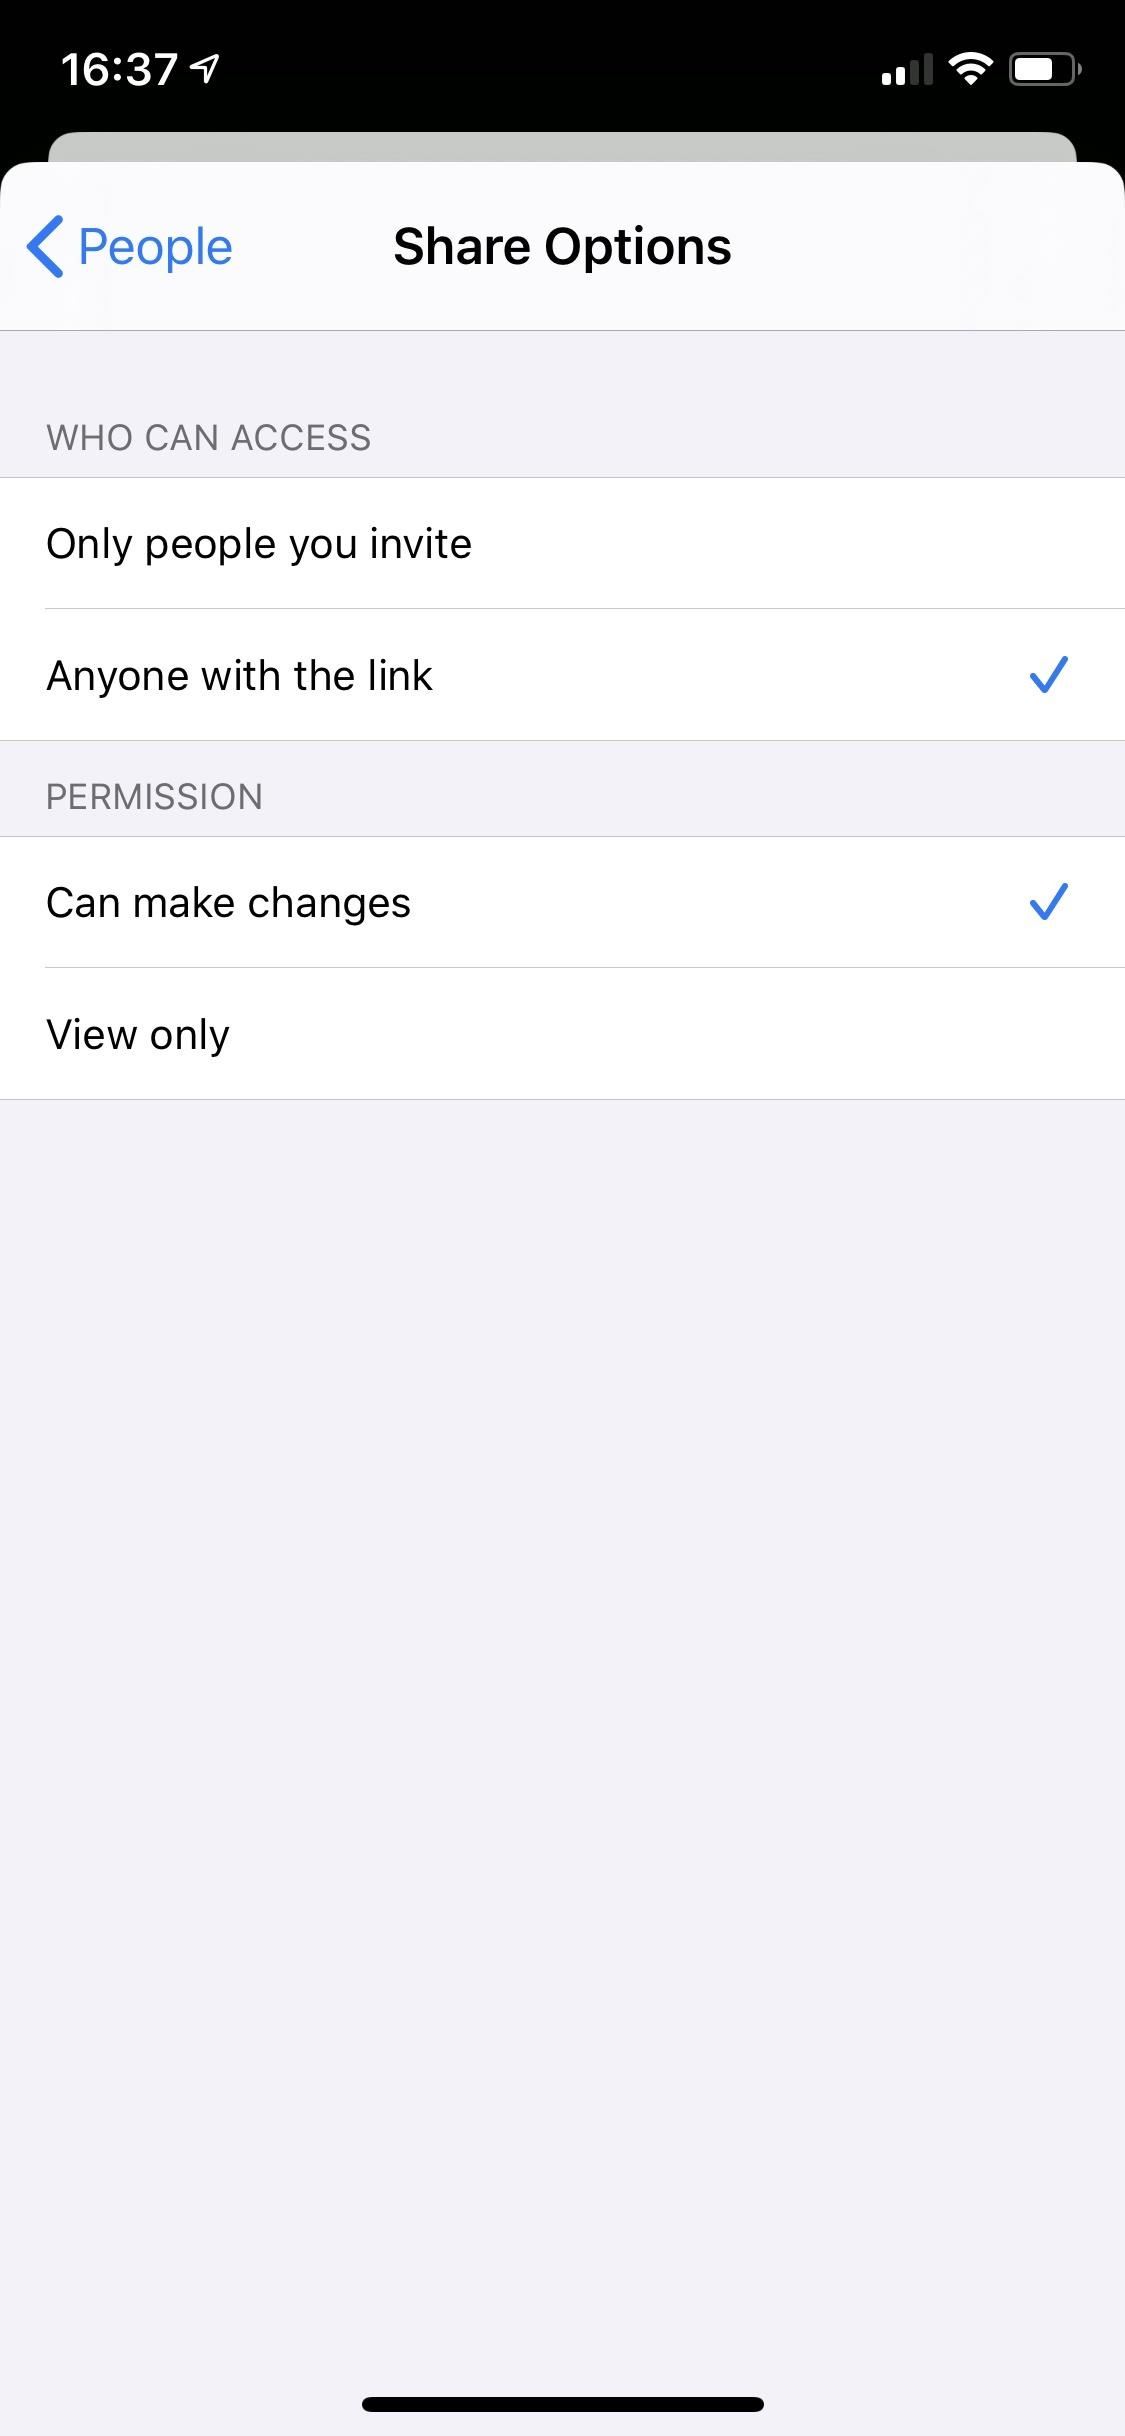 How to Share iCloud Drive Folders to Collaborators or as ZIP Files to Anyone from Your iPhone